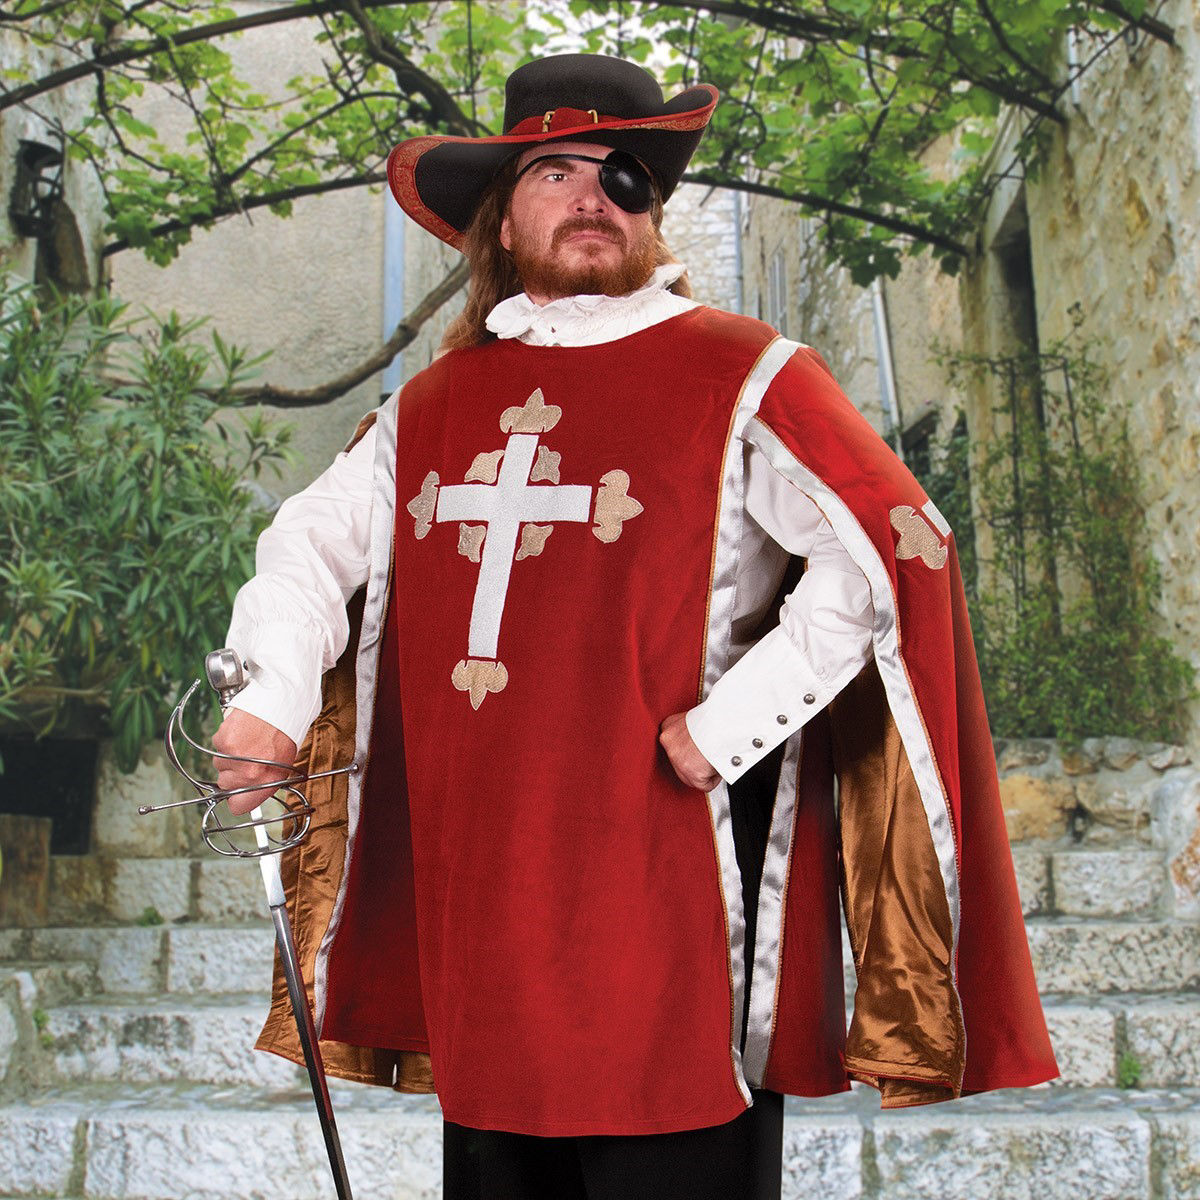 Red cotton velvet Tabard has antique gold rayon lining and embroidered crosses with fleur-de-lis on chest and sleeves